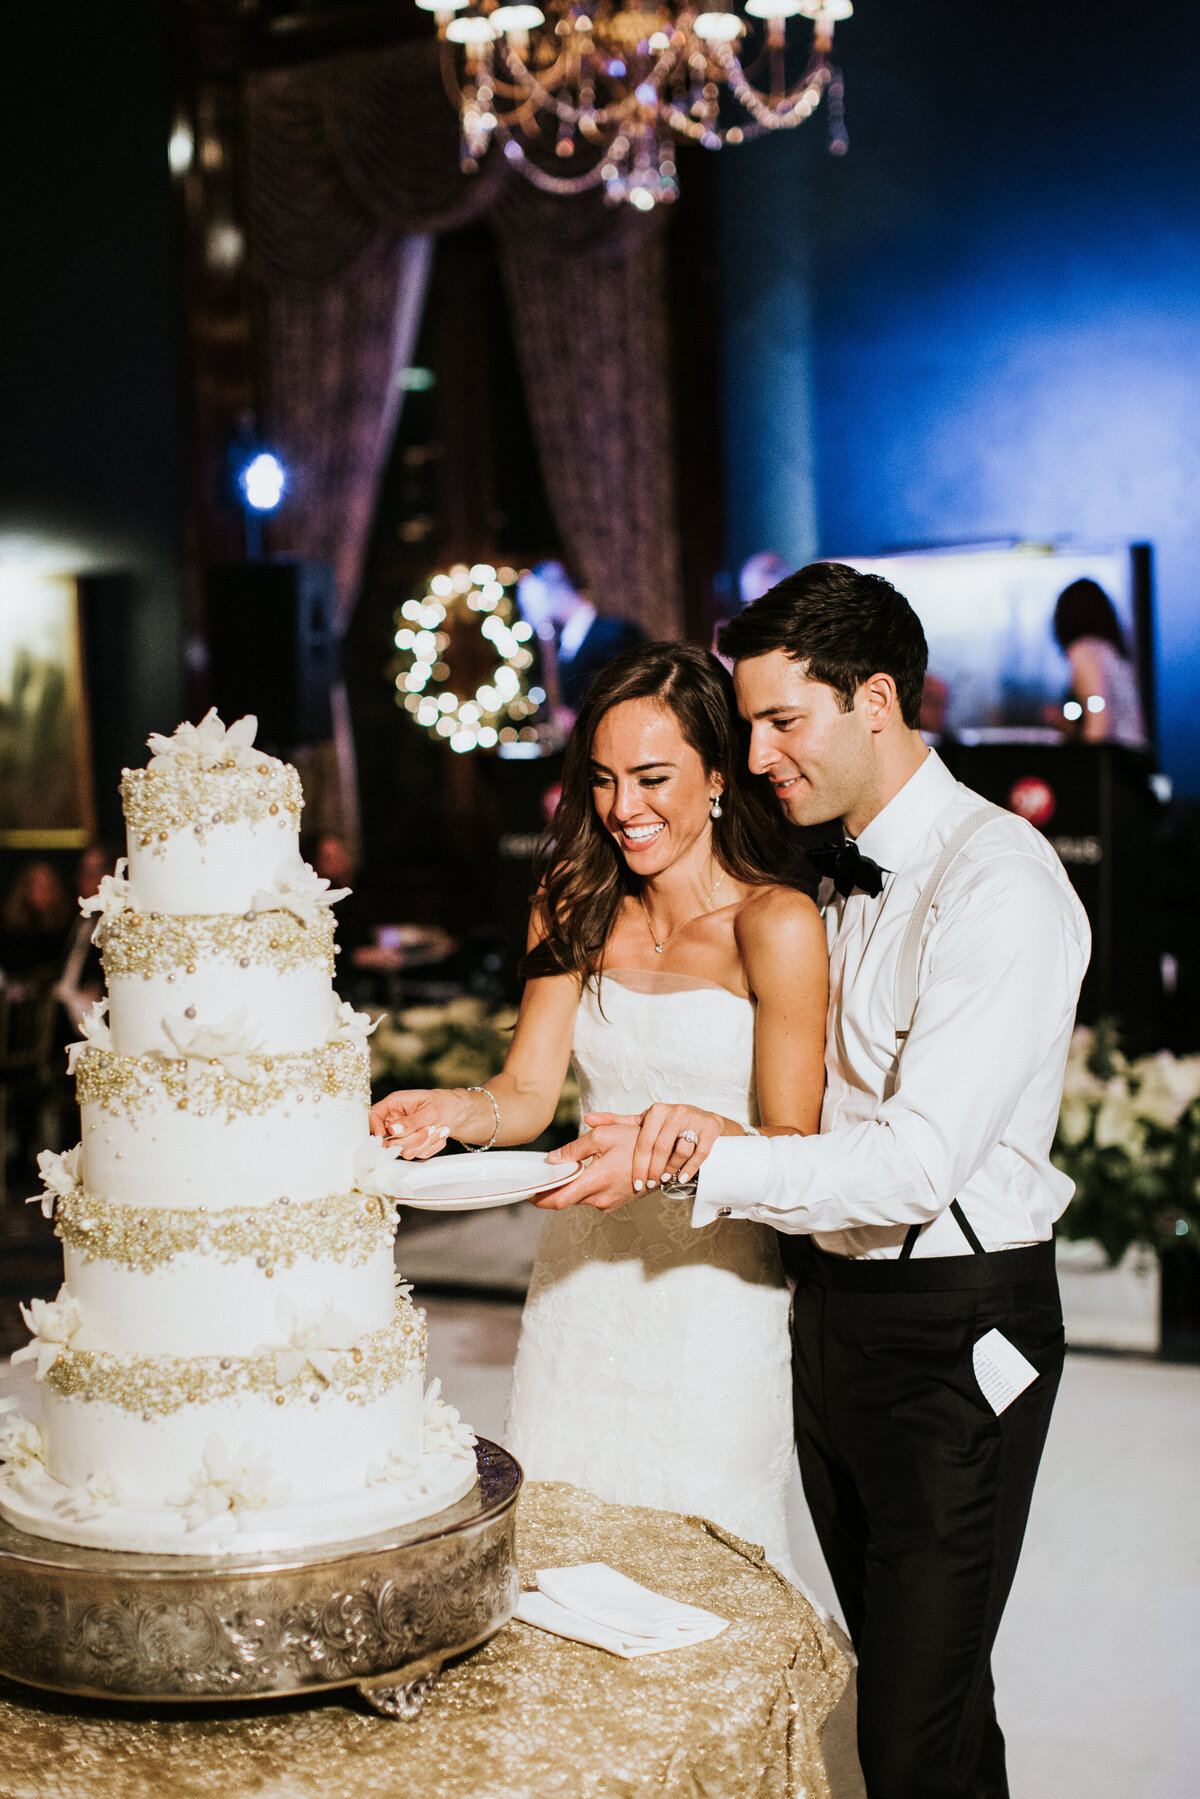 Bride and groom cutting five tier wedding cake